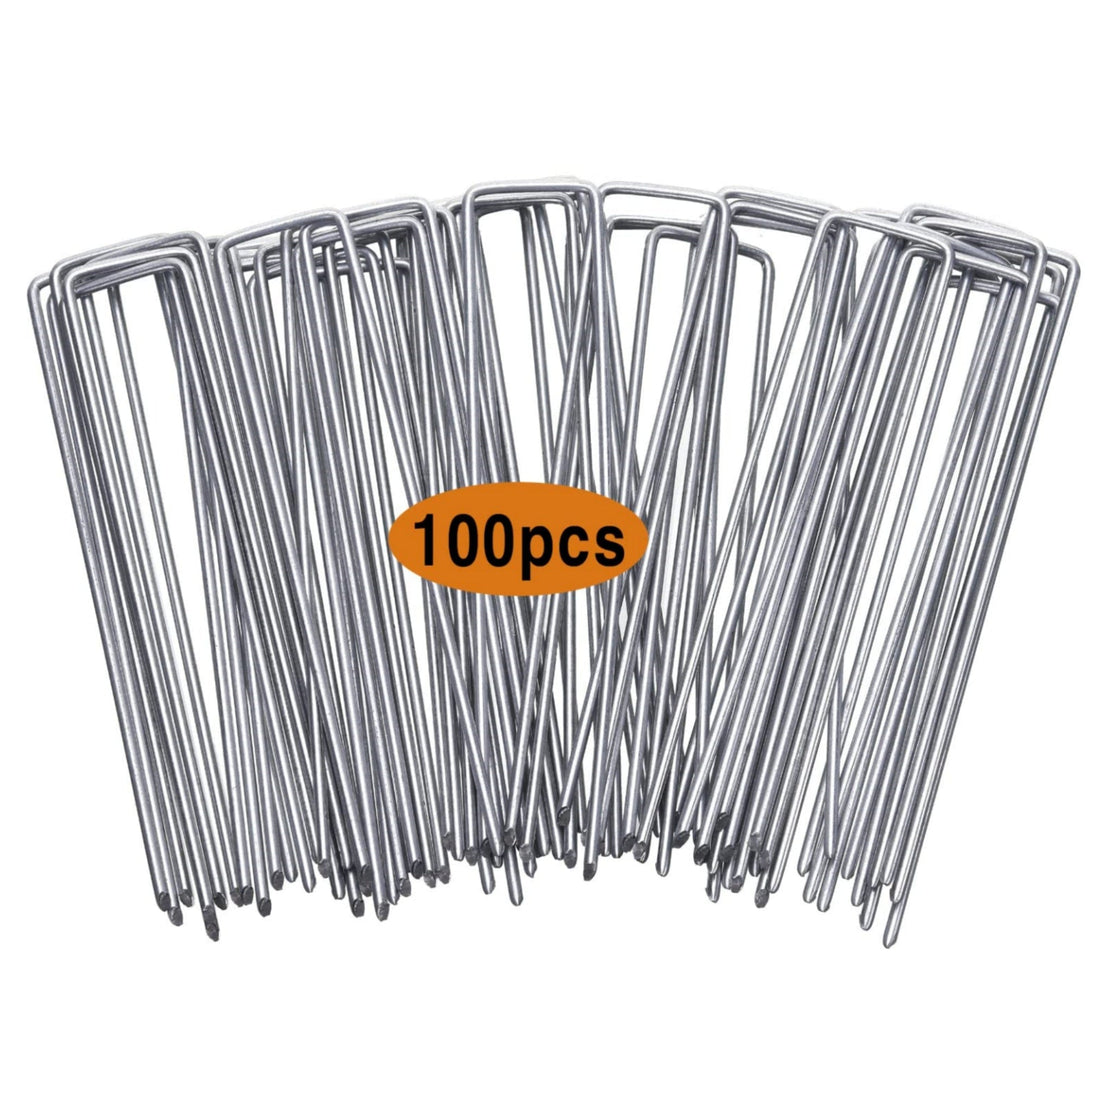 U-Type 7.8 Inch Landscape Staples, 100/50 Pack for Ground Cover